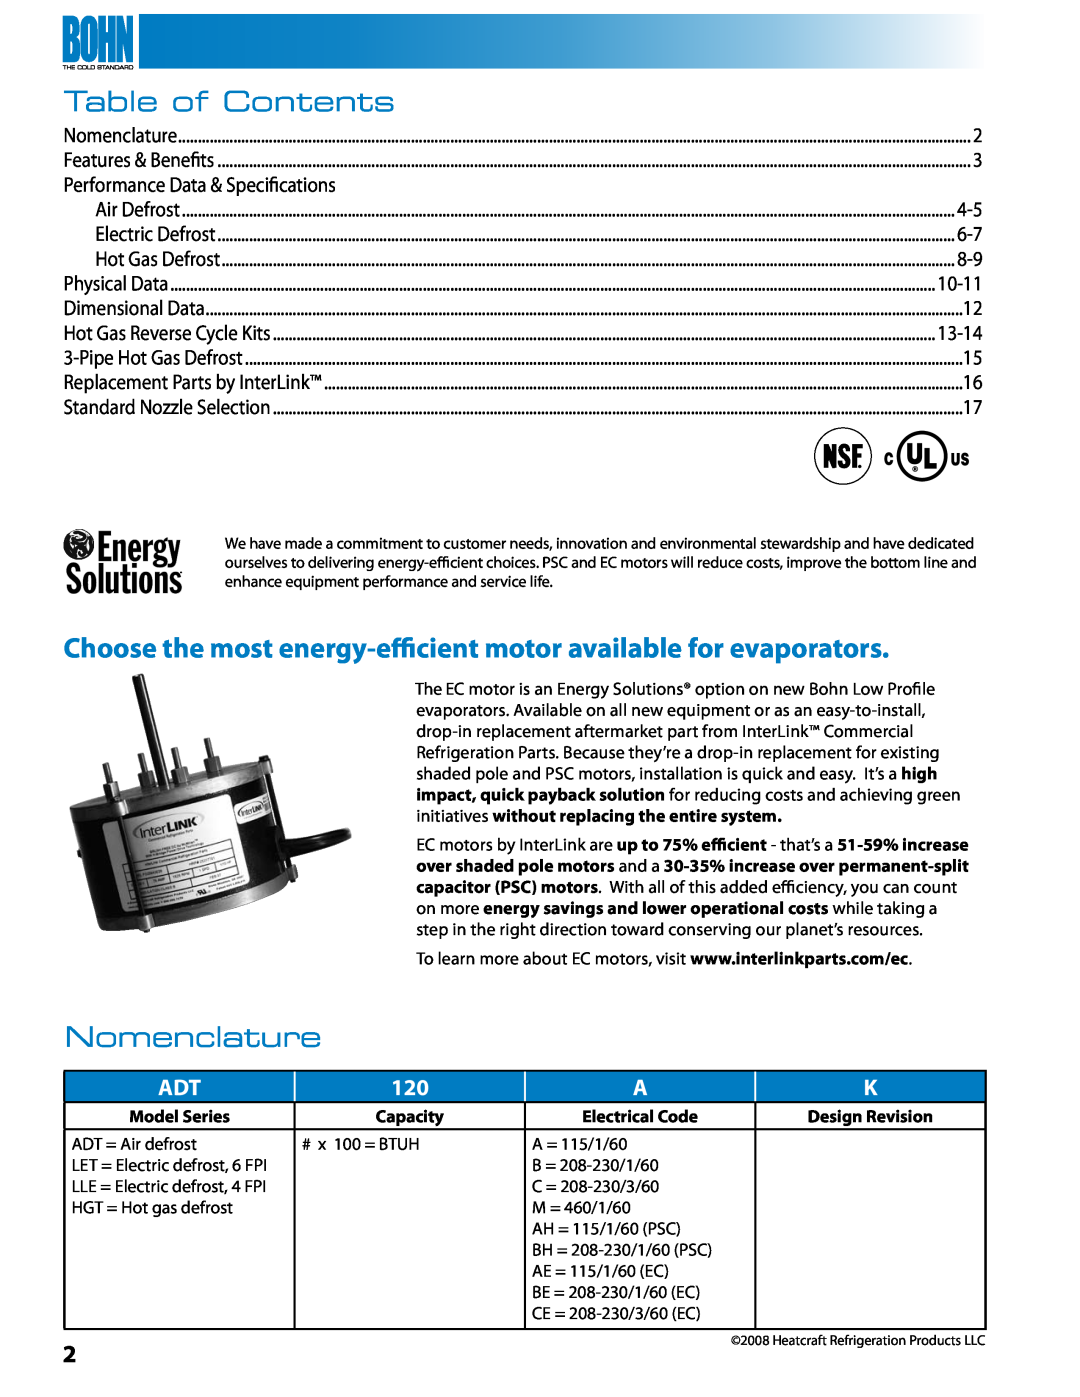 Heatcraft Refrigeration Products BN-LOPTB manual Table of Contents, Nomenclature 